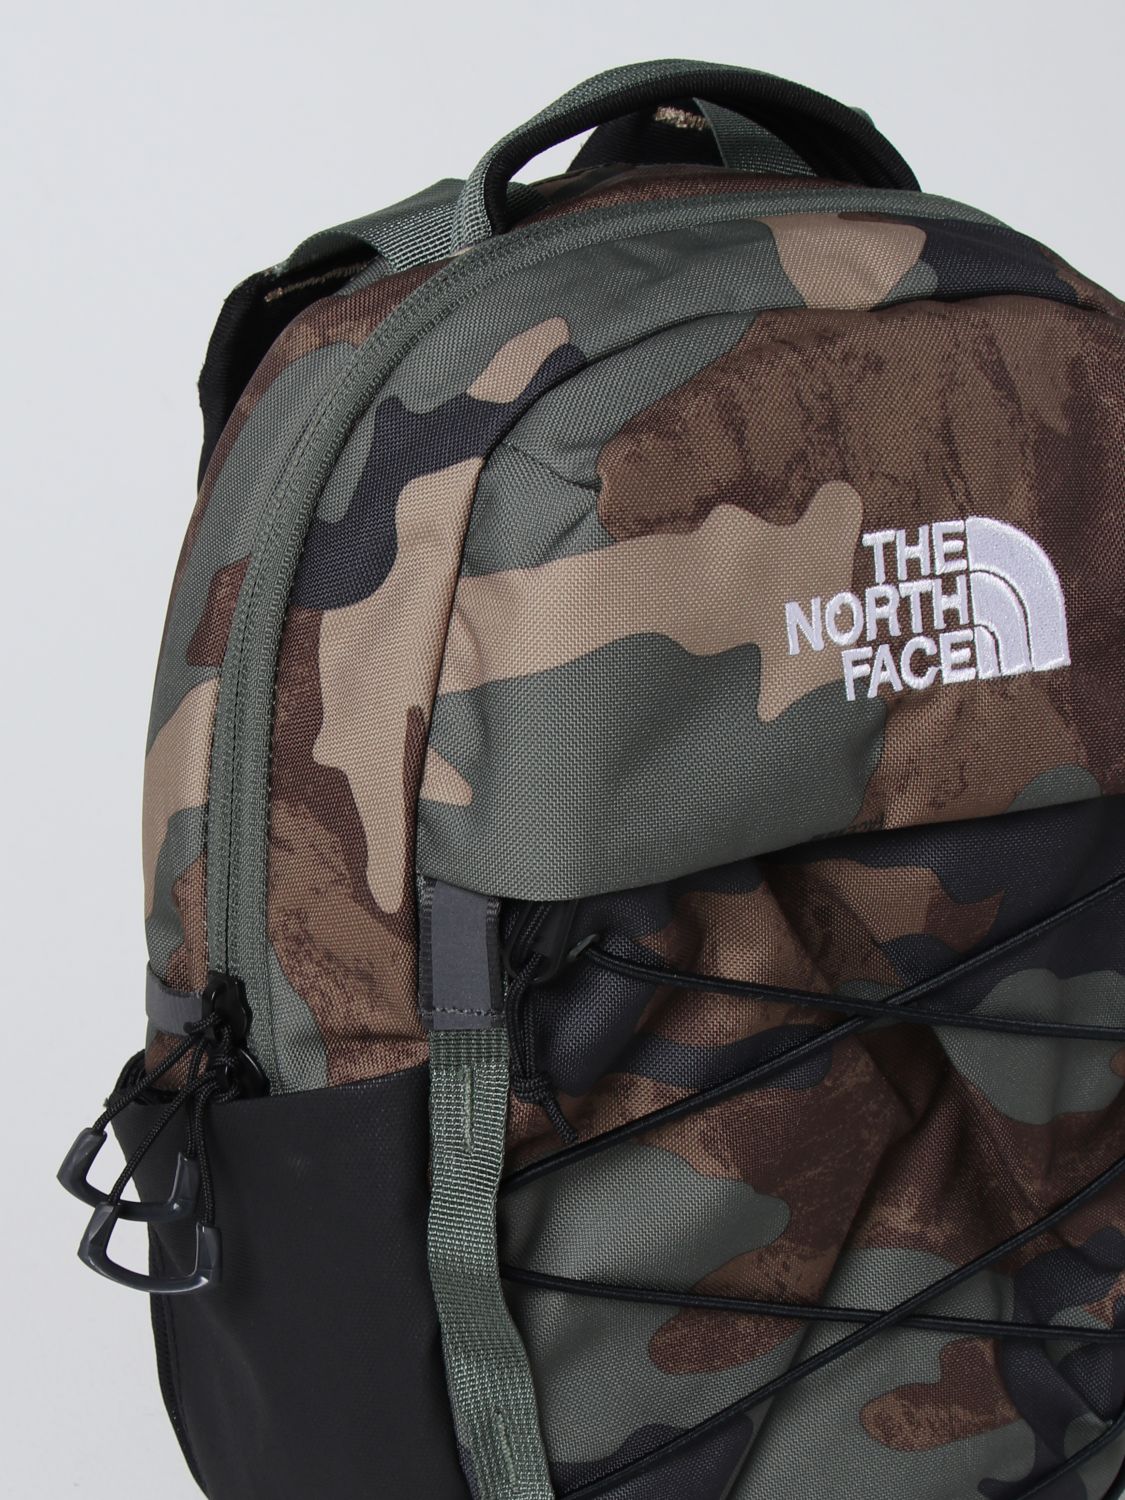 Sac à dos The North Face: Sac à dos homme The North Face vert militaire 3